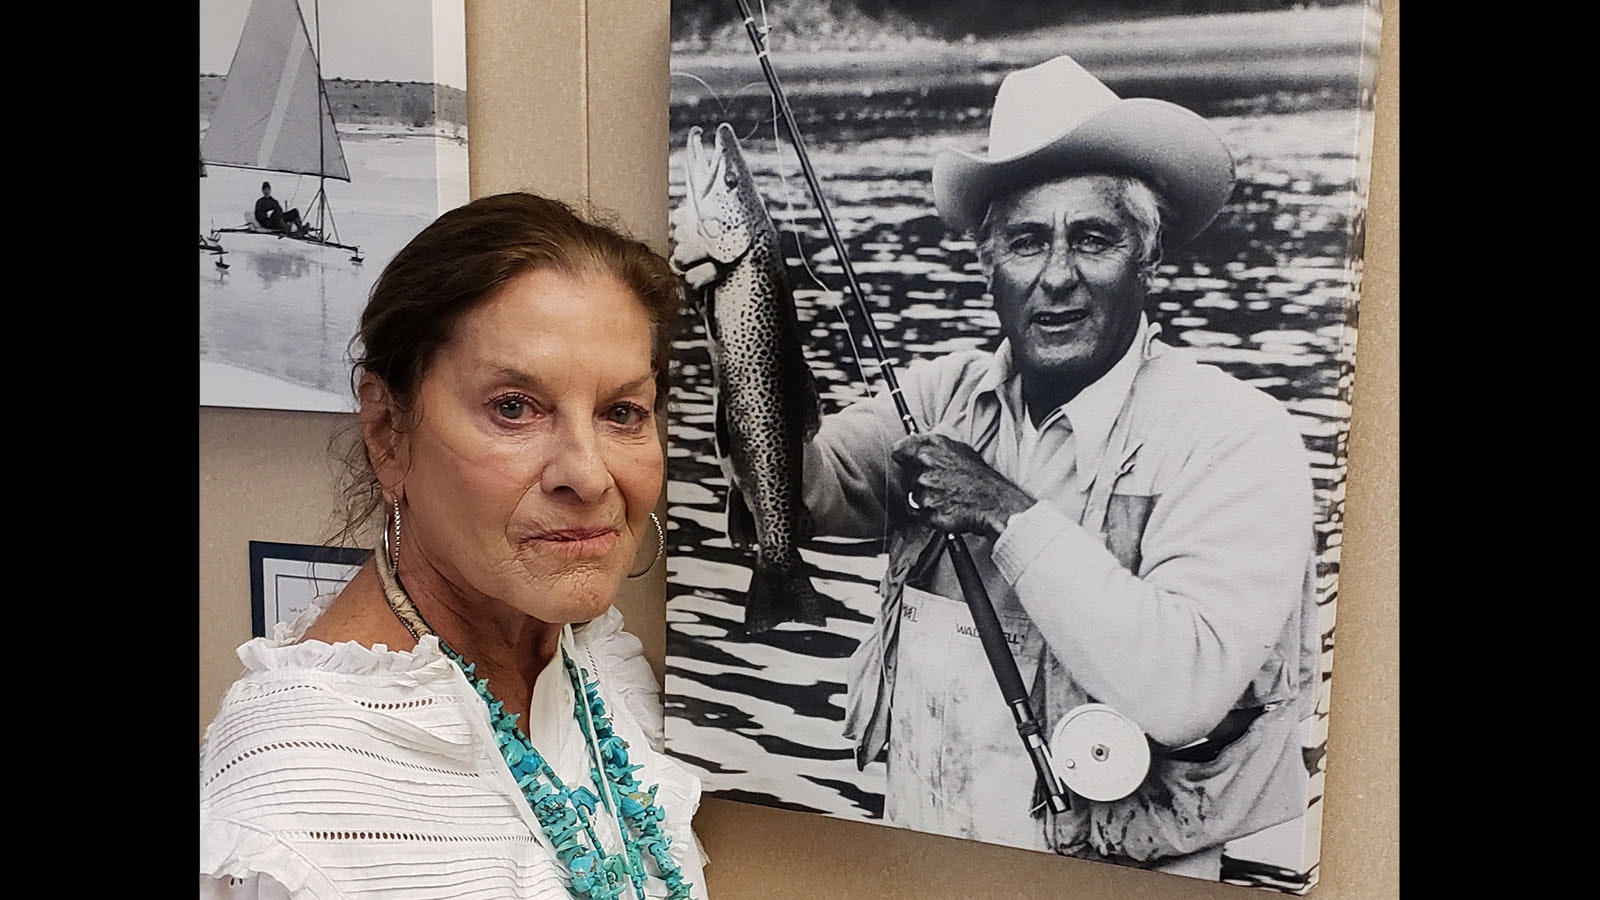 Cheryl Gowdy with a photograph of her famous father, Curt Gowdy.